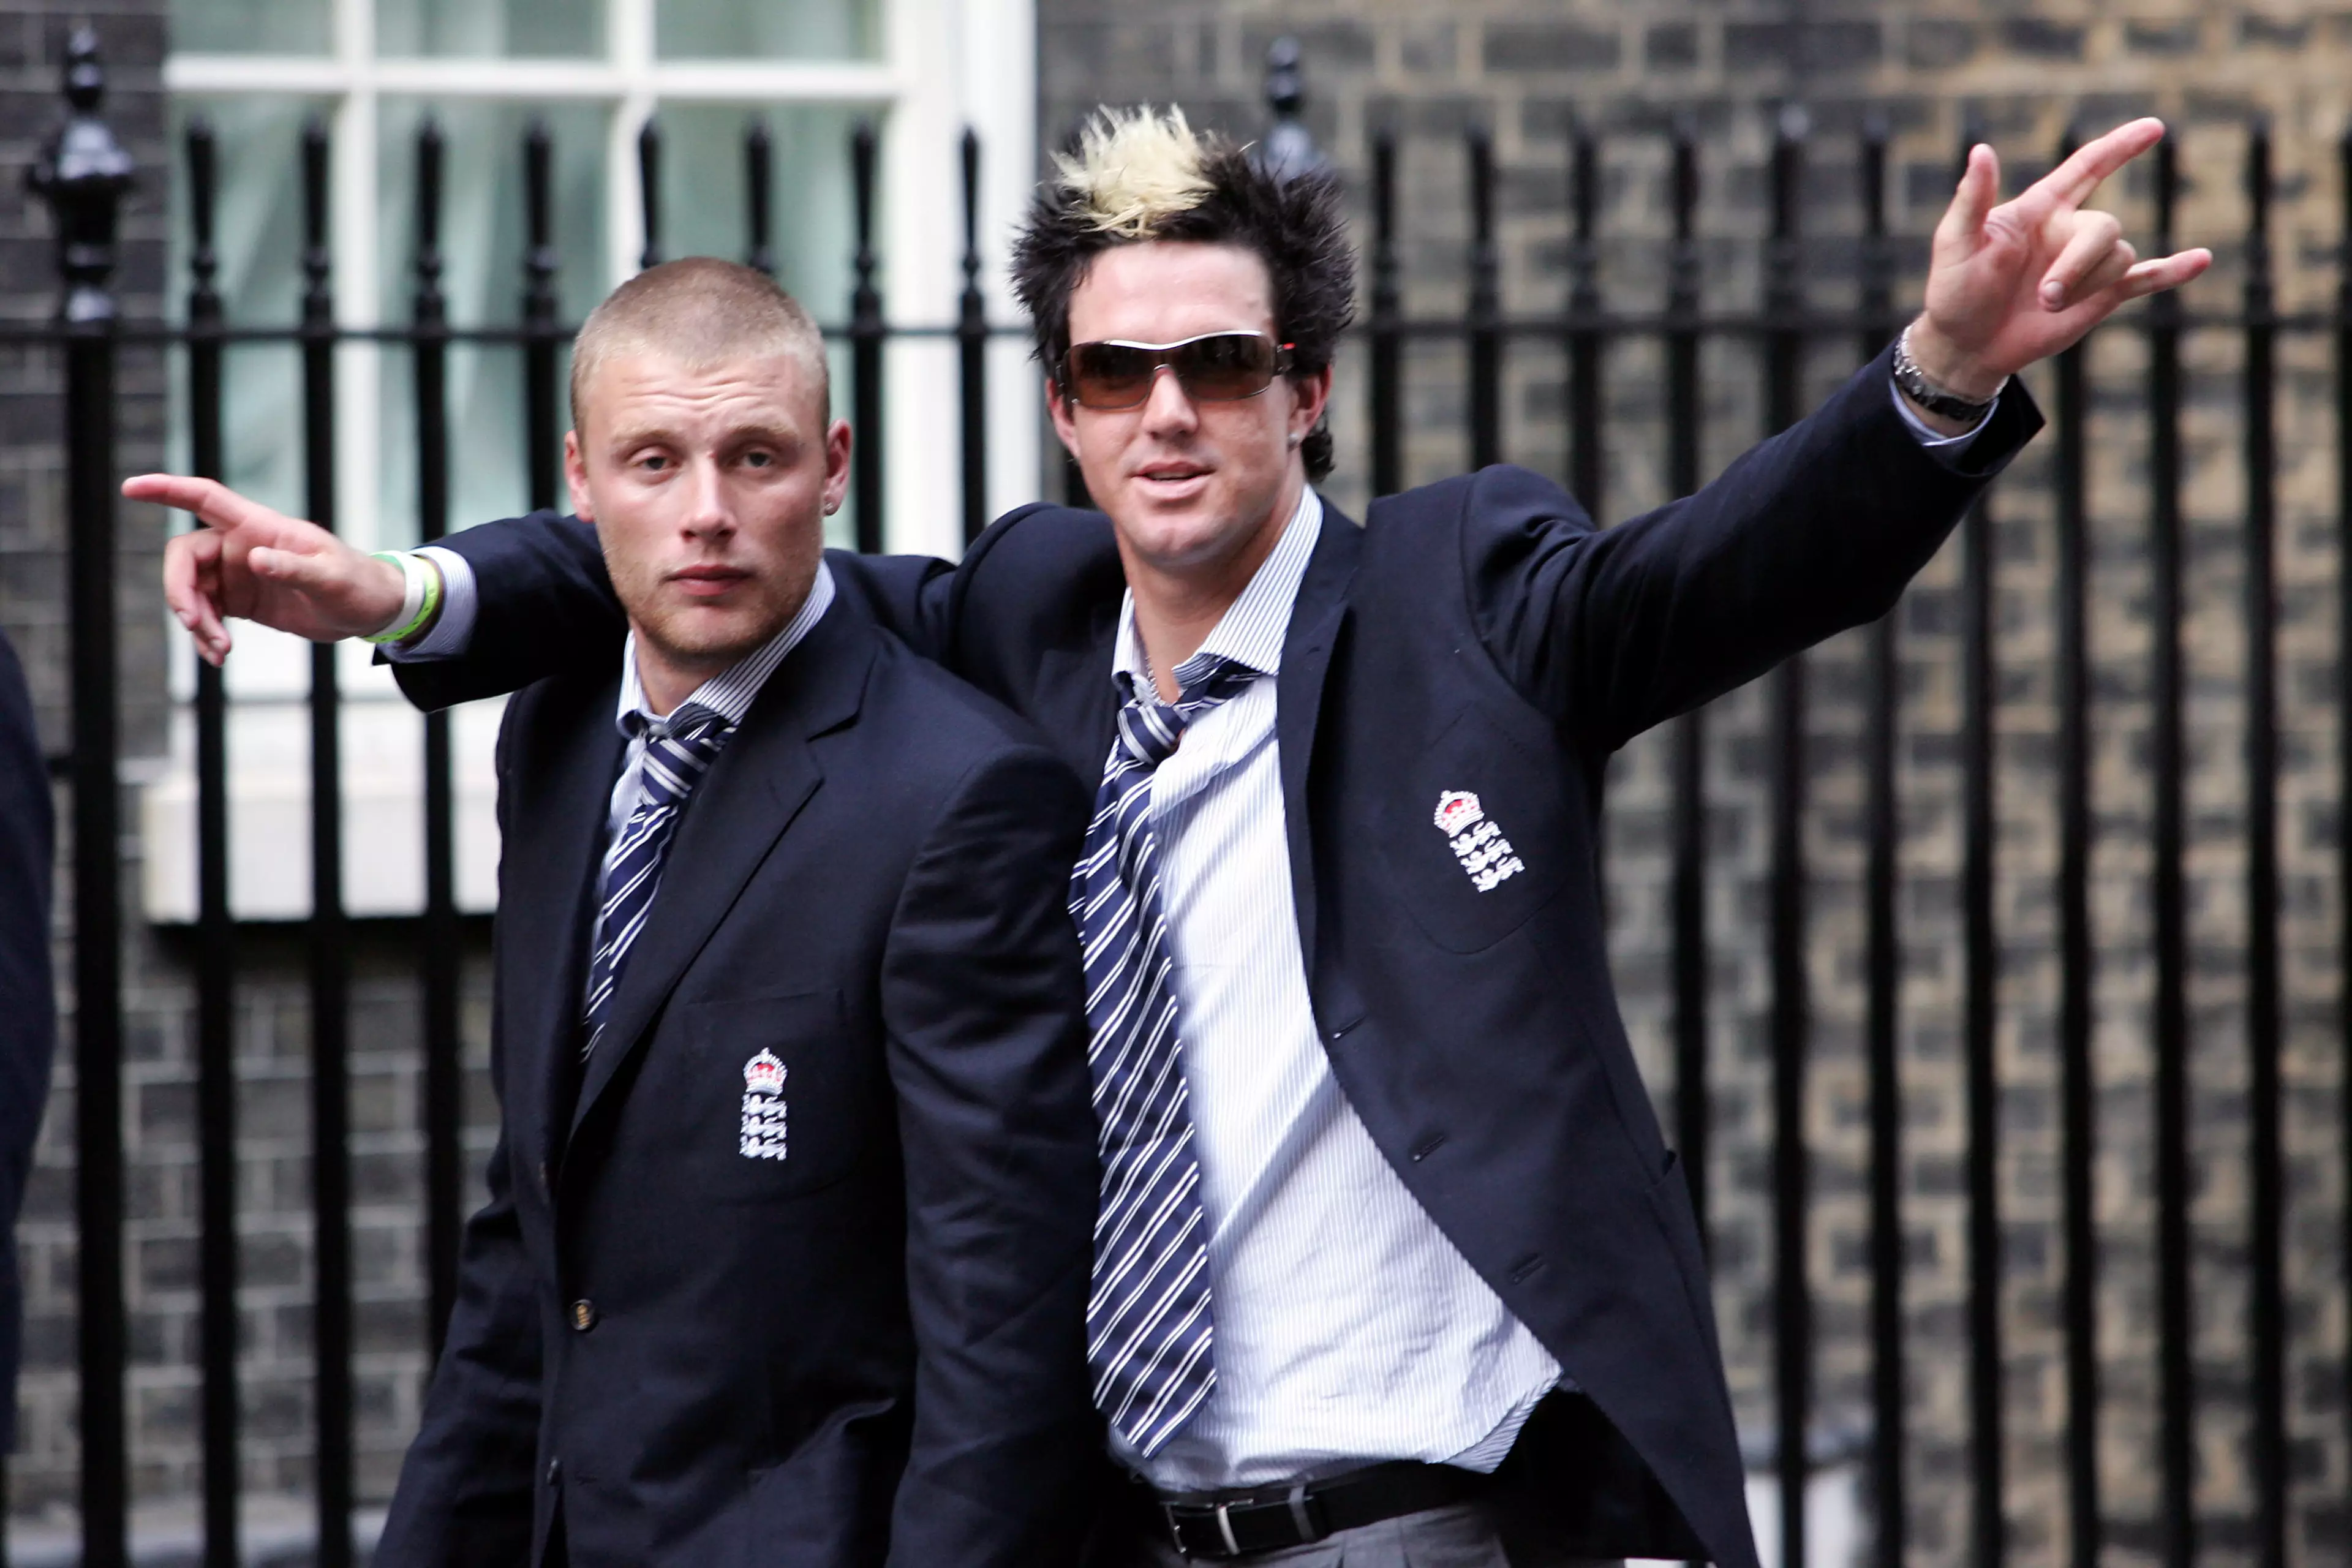 Flintoff and Pietersen the night after winning The Ashes in 2005.